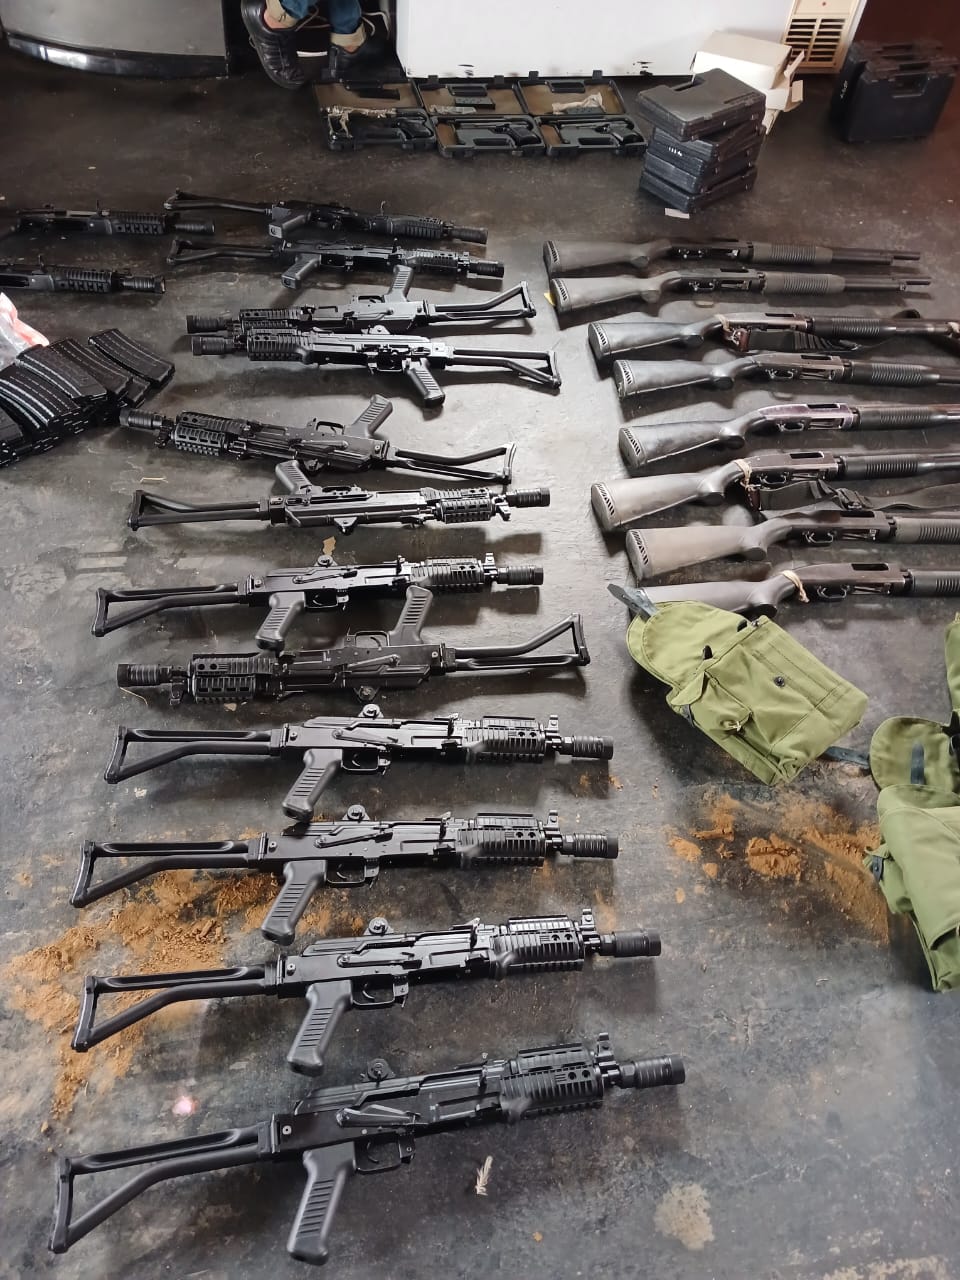 A pensioner to appear in court, 106 guns and 1704 various assorted rounds of ammunition seized